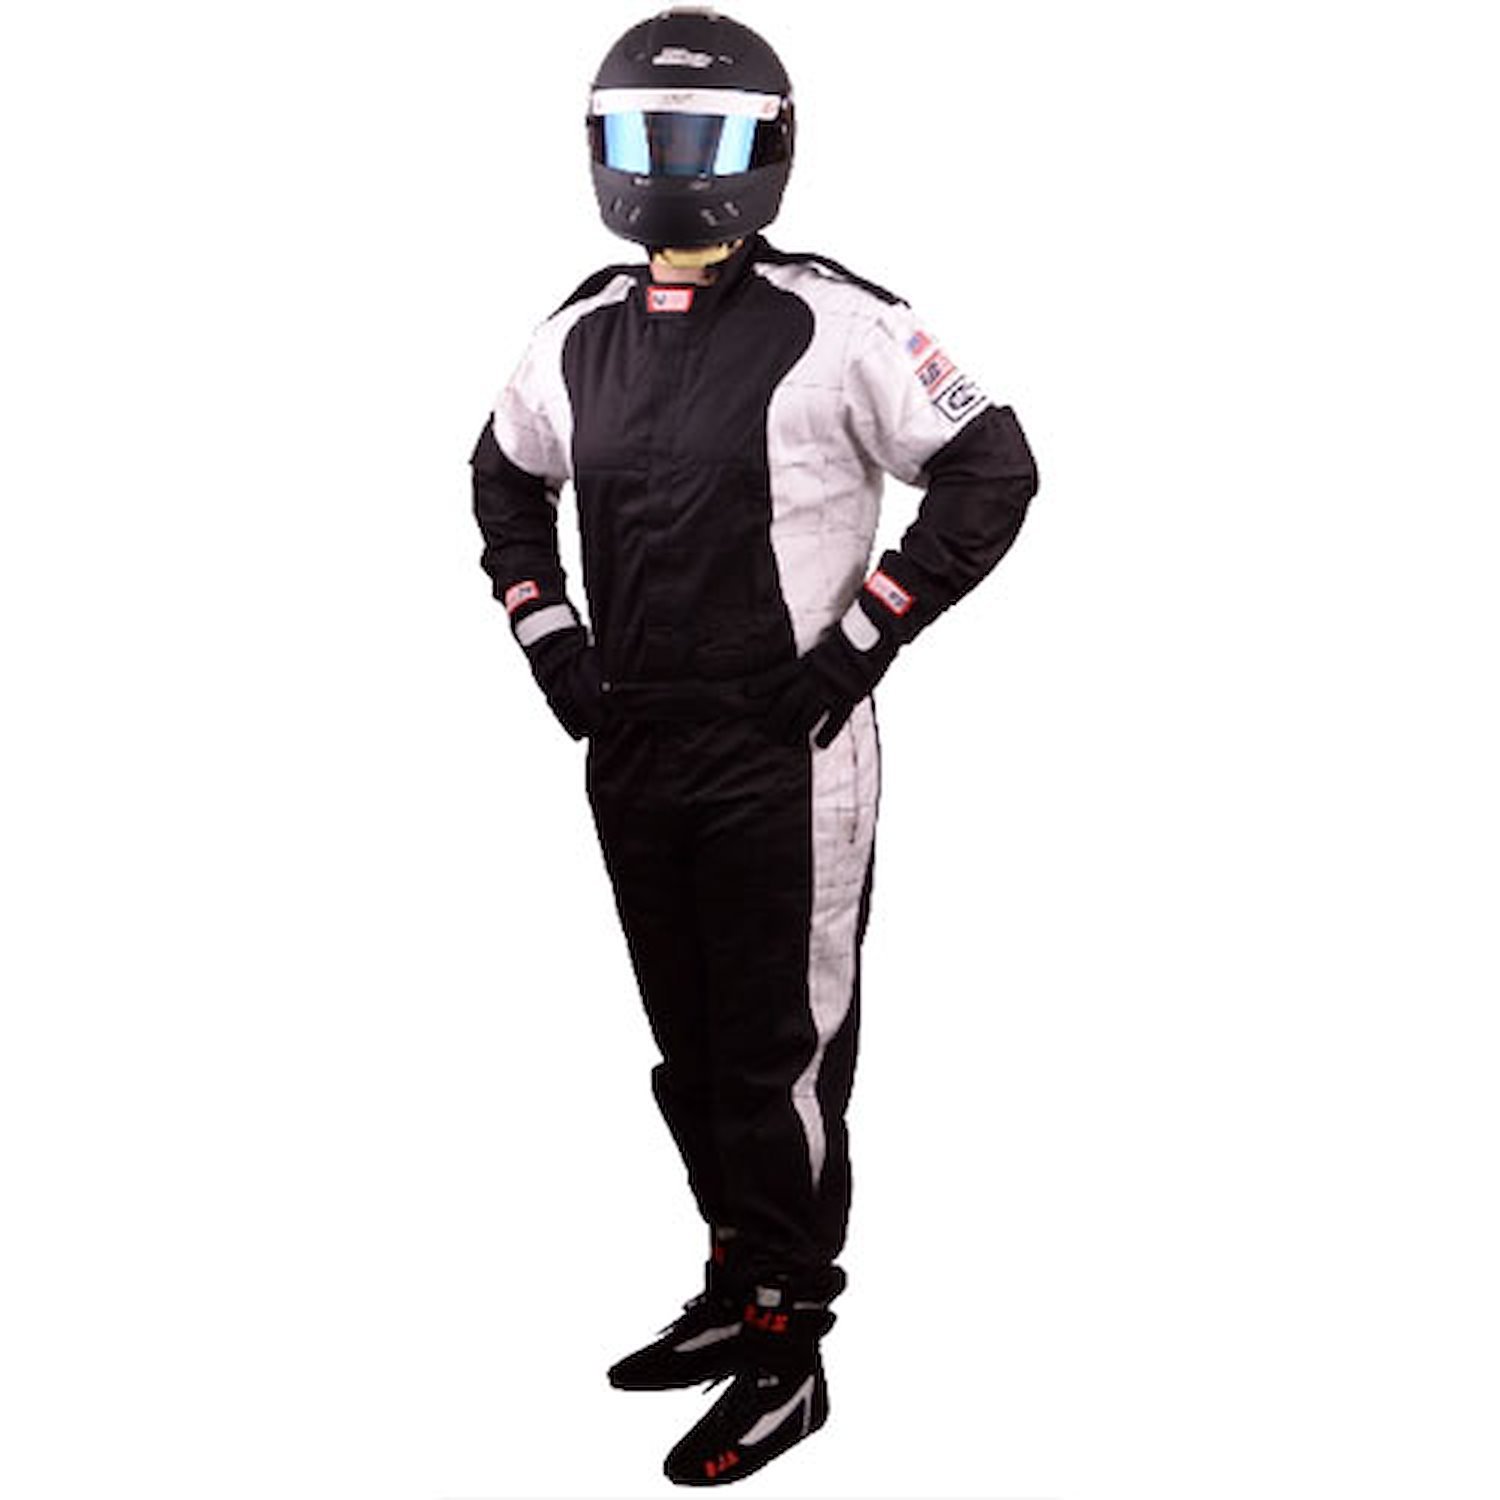 Elite Series Driving Suit 3.2 A/1 SFI Rating